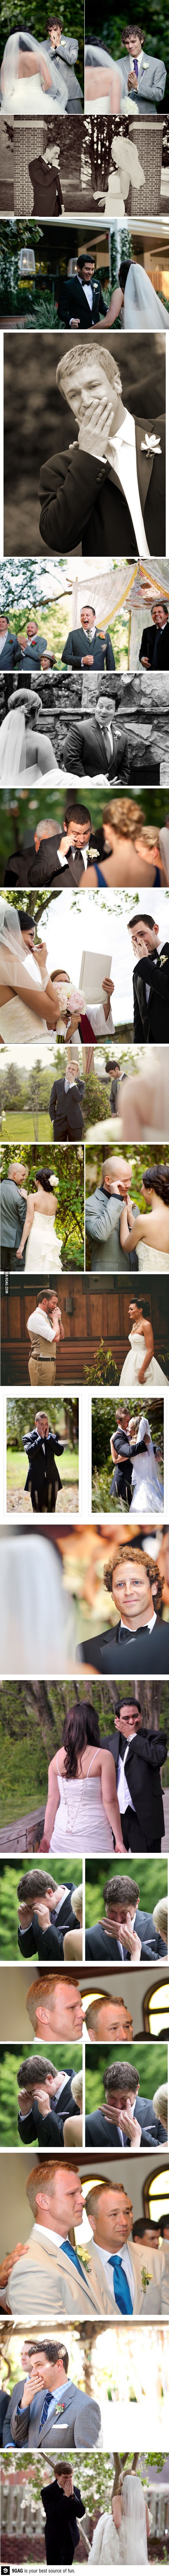 The groom sees his darling in a wedding dress for the first time…awwwhh